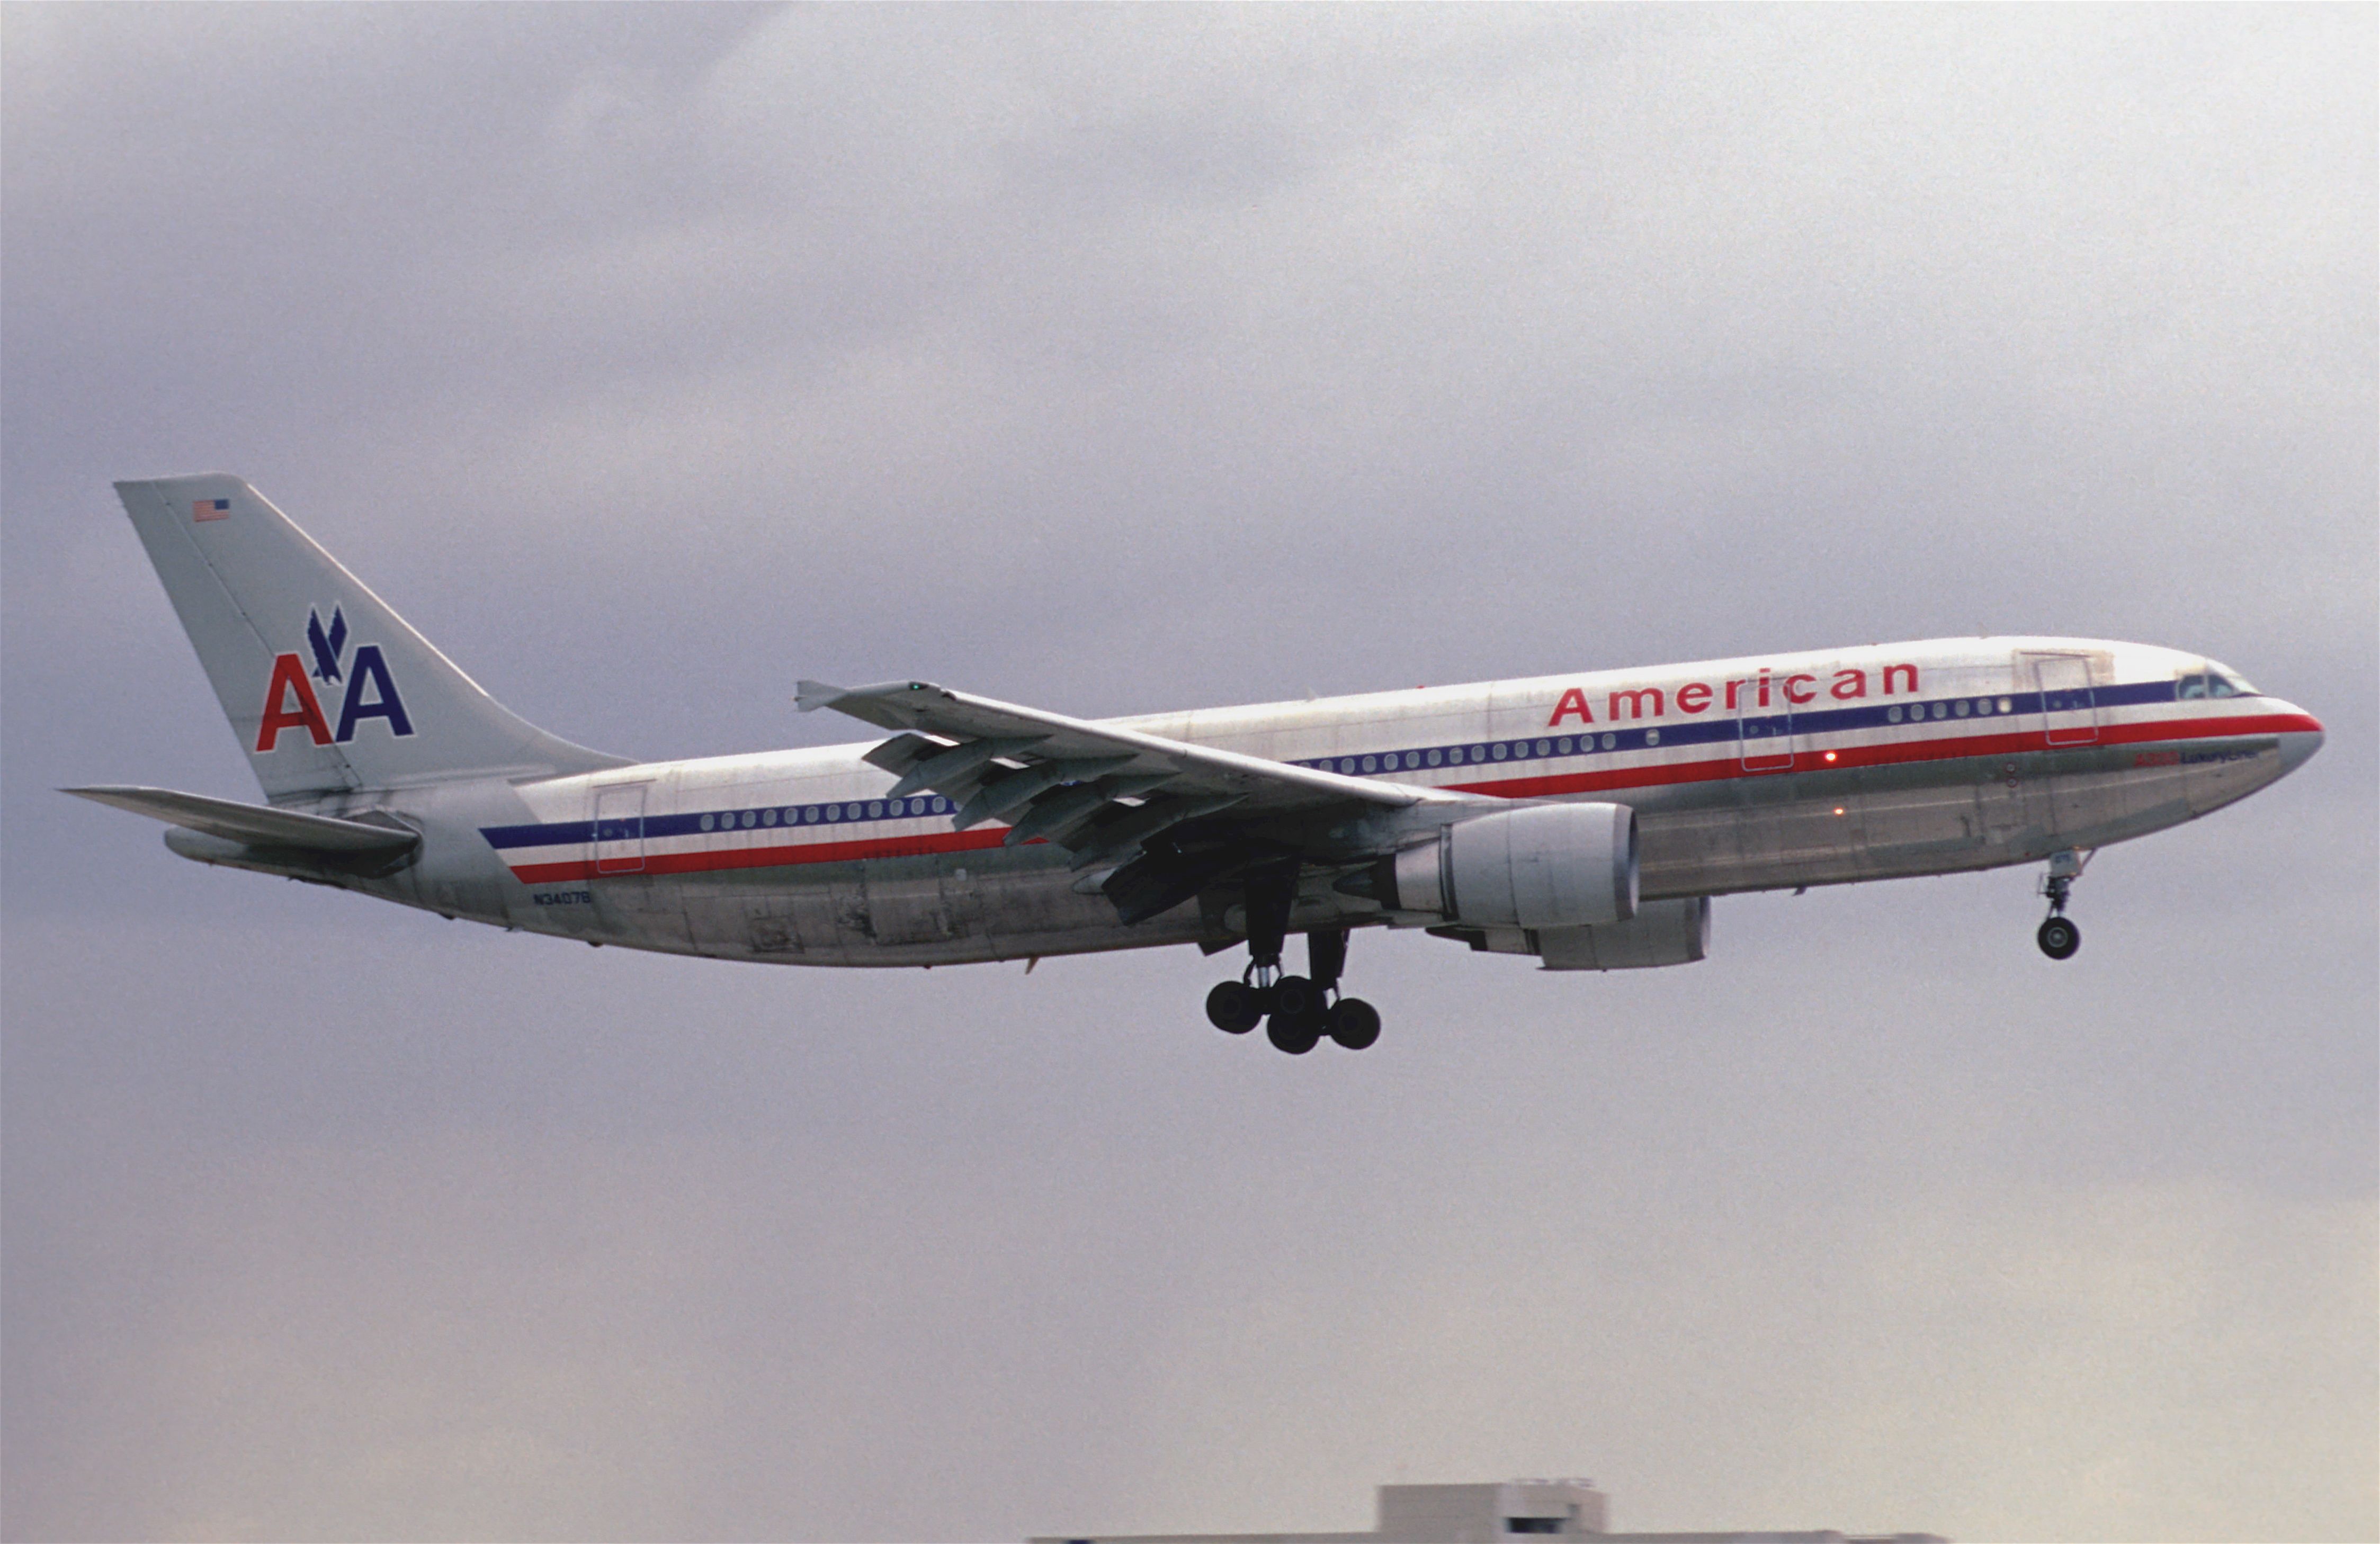 An American Airlines Airbus A300 Flying in the sky.